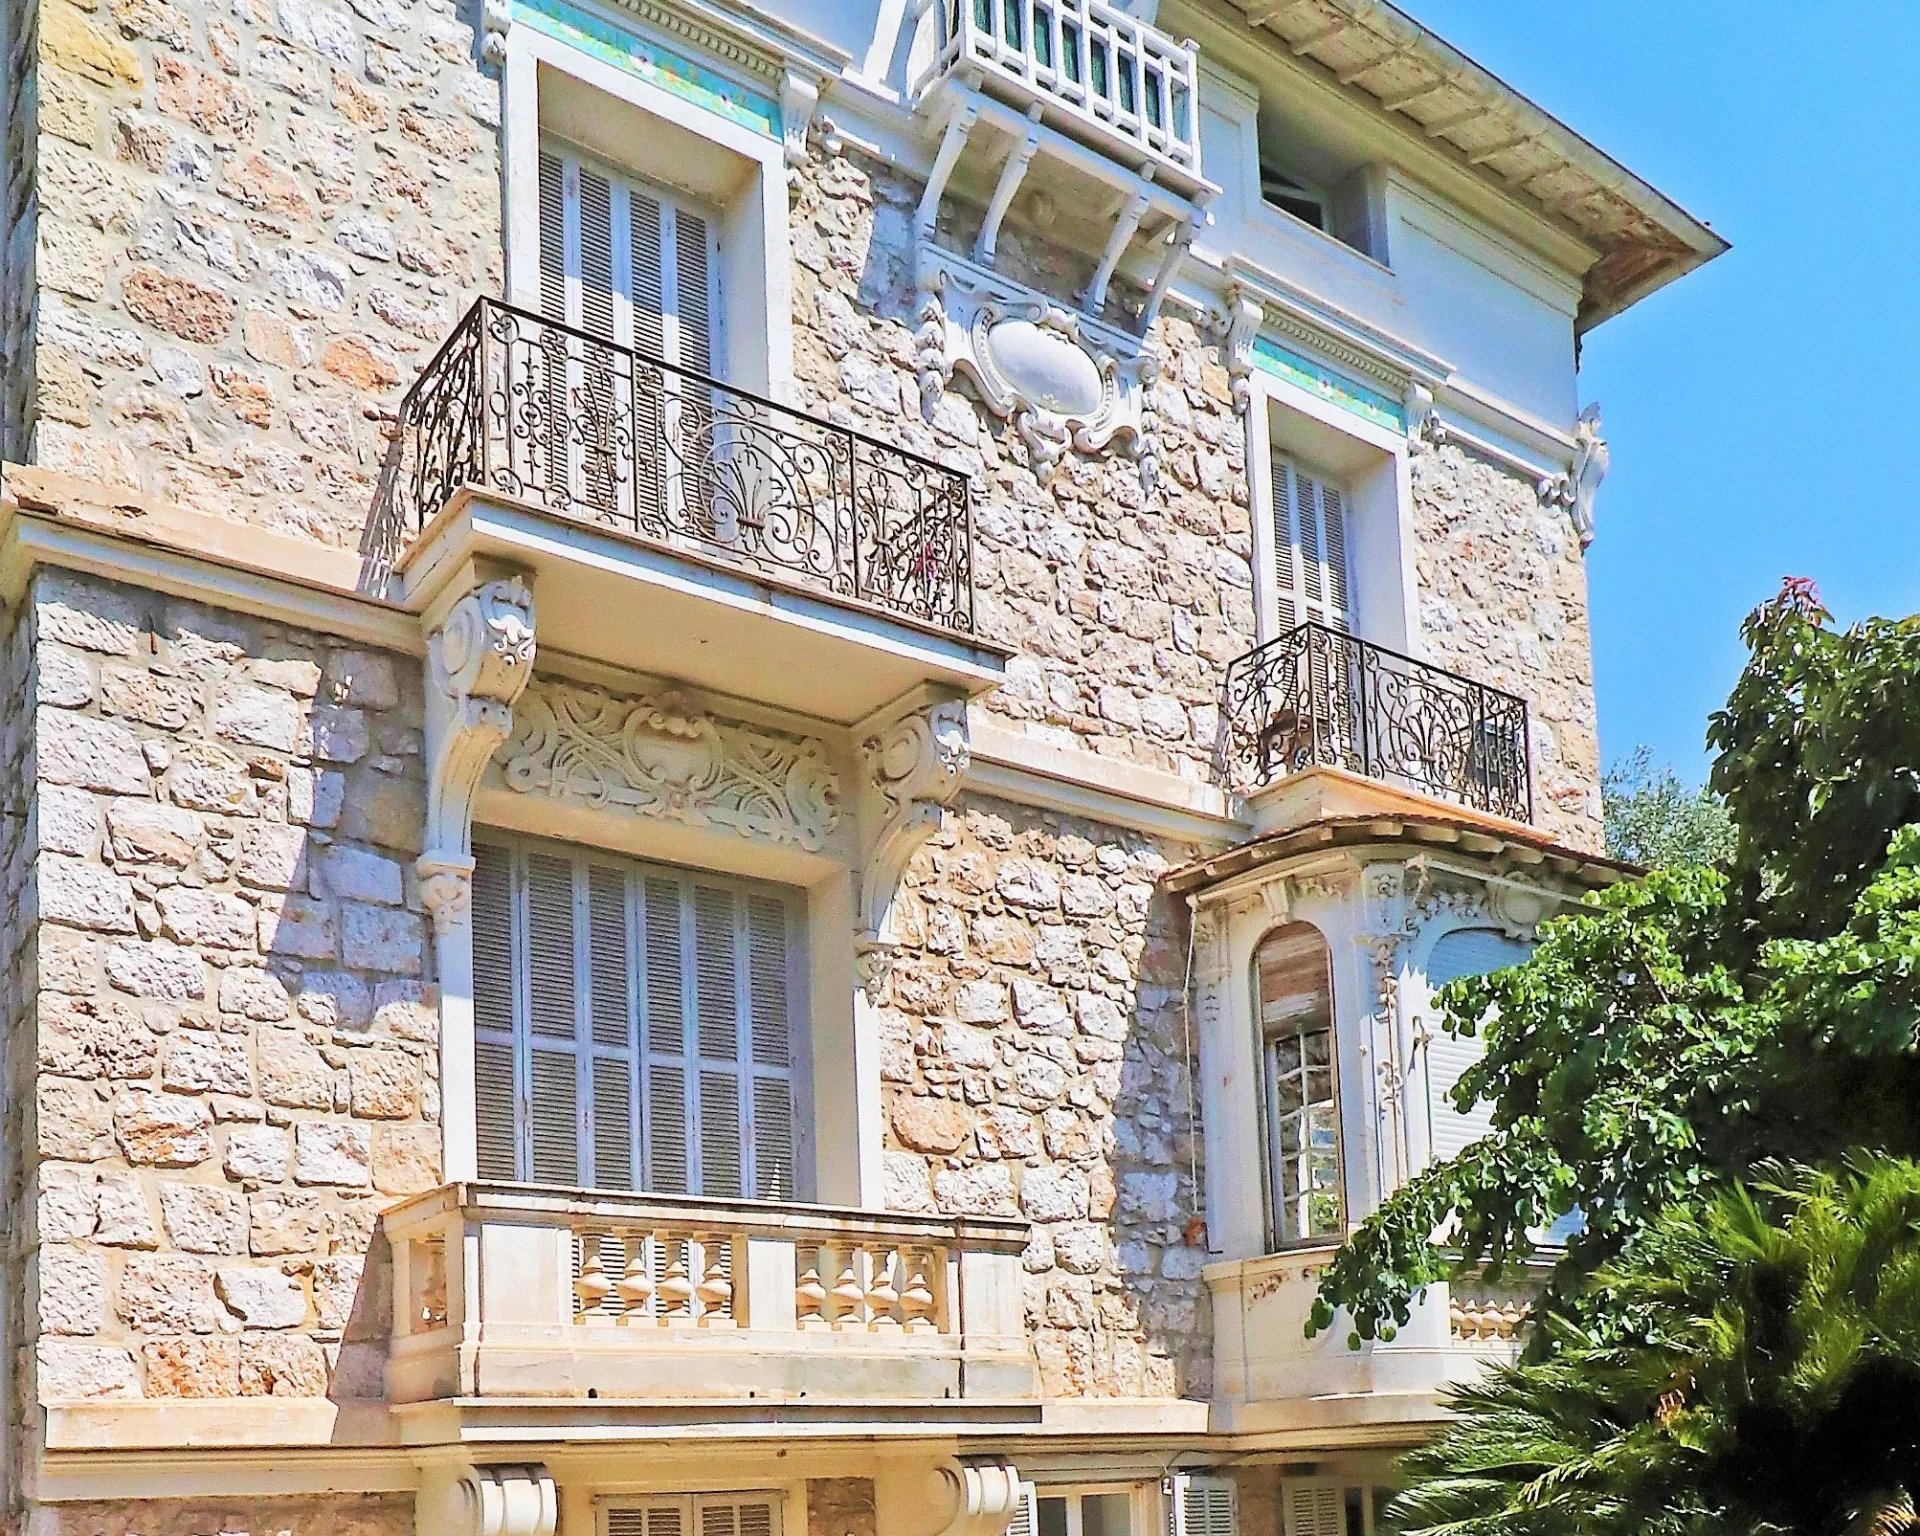 HOUSE located at the heart of Beaulieu sur mer